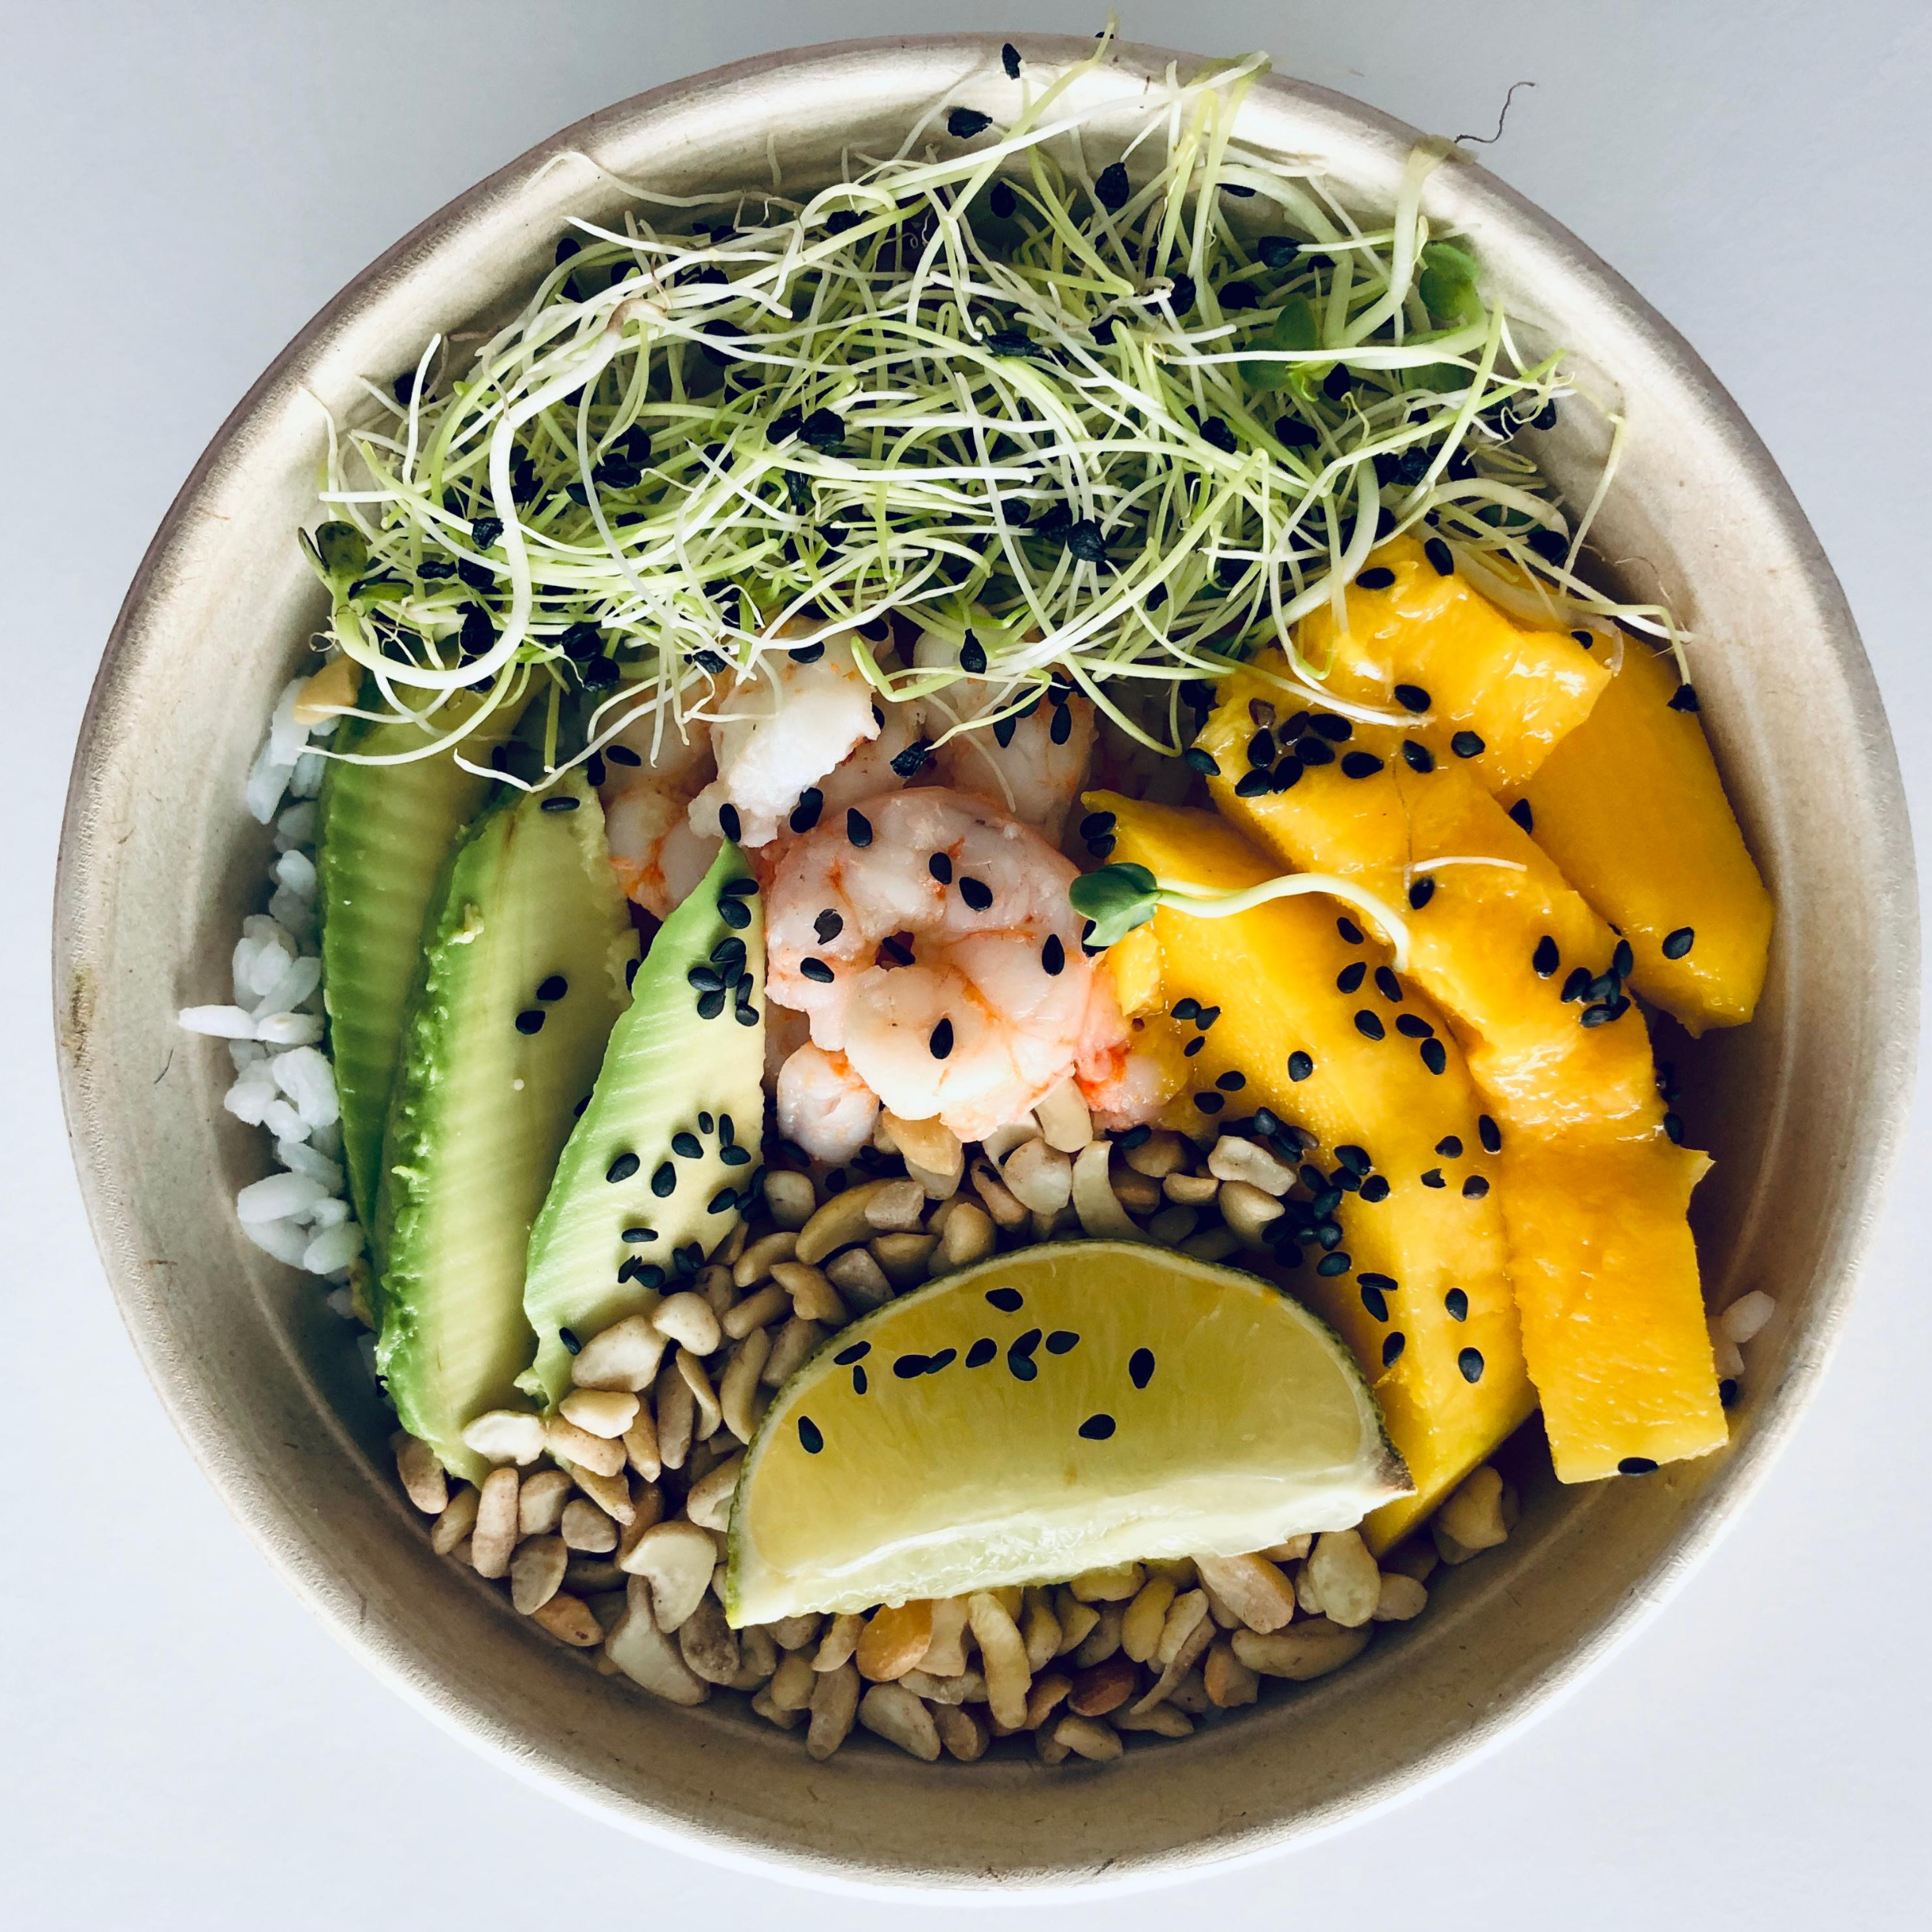 Bowl with mango, shrimp, rice, avocado, nuts, lime, sprouts with black seeds, represents “What’s Your Meal Prep Look Like” program